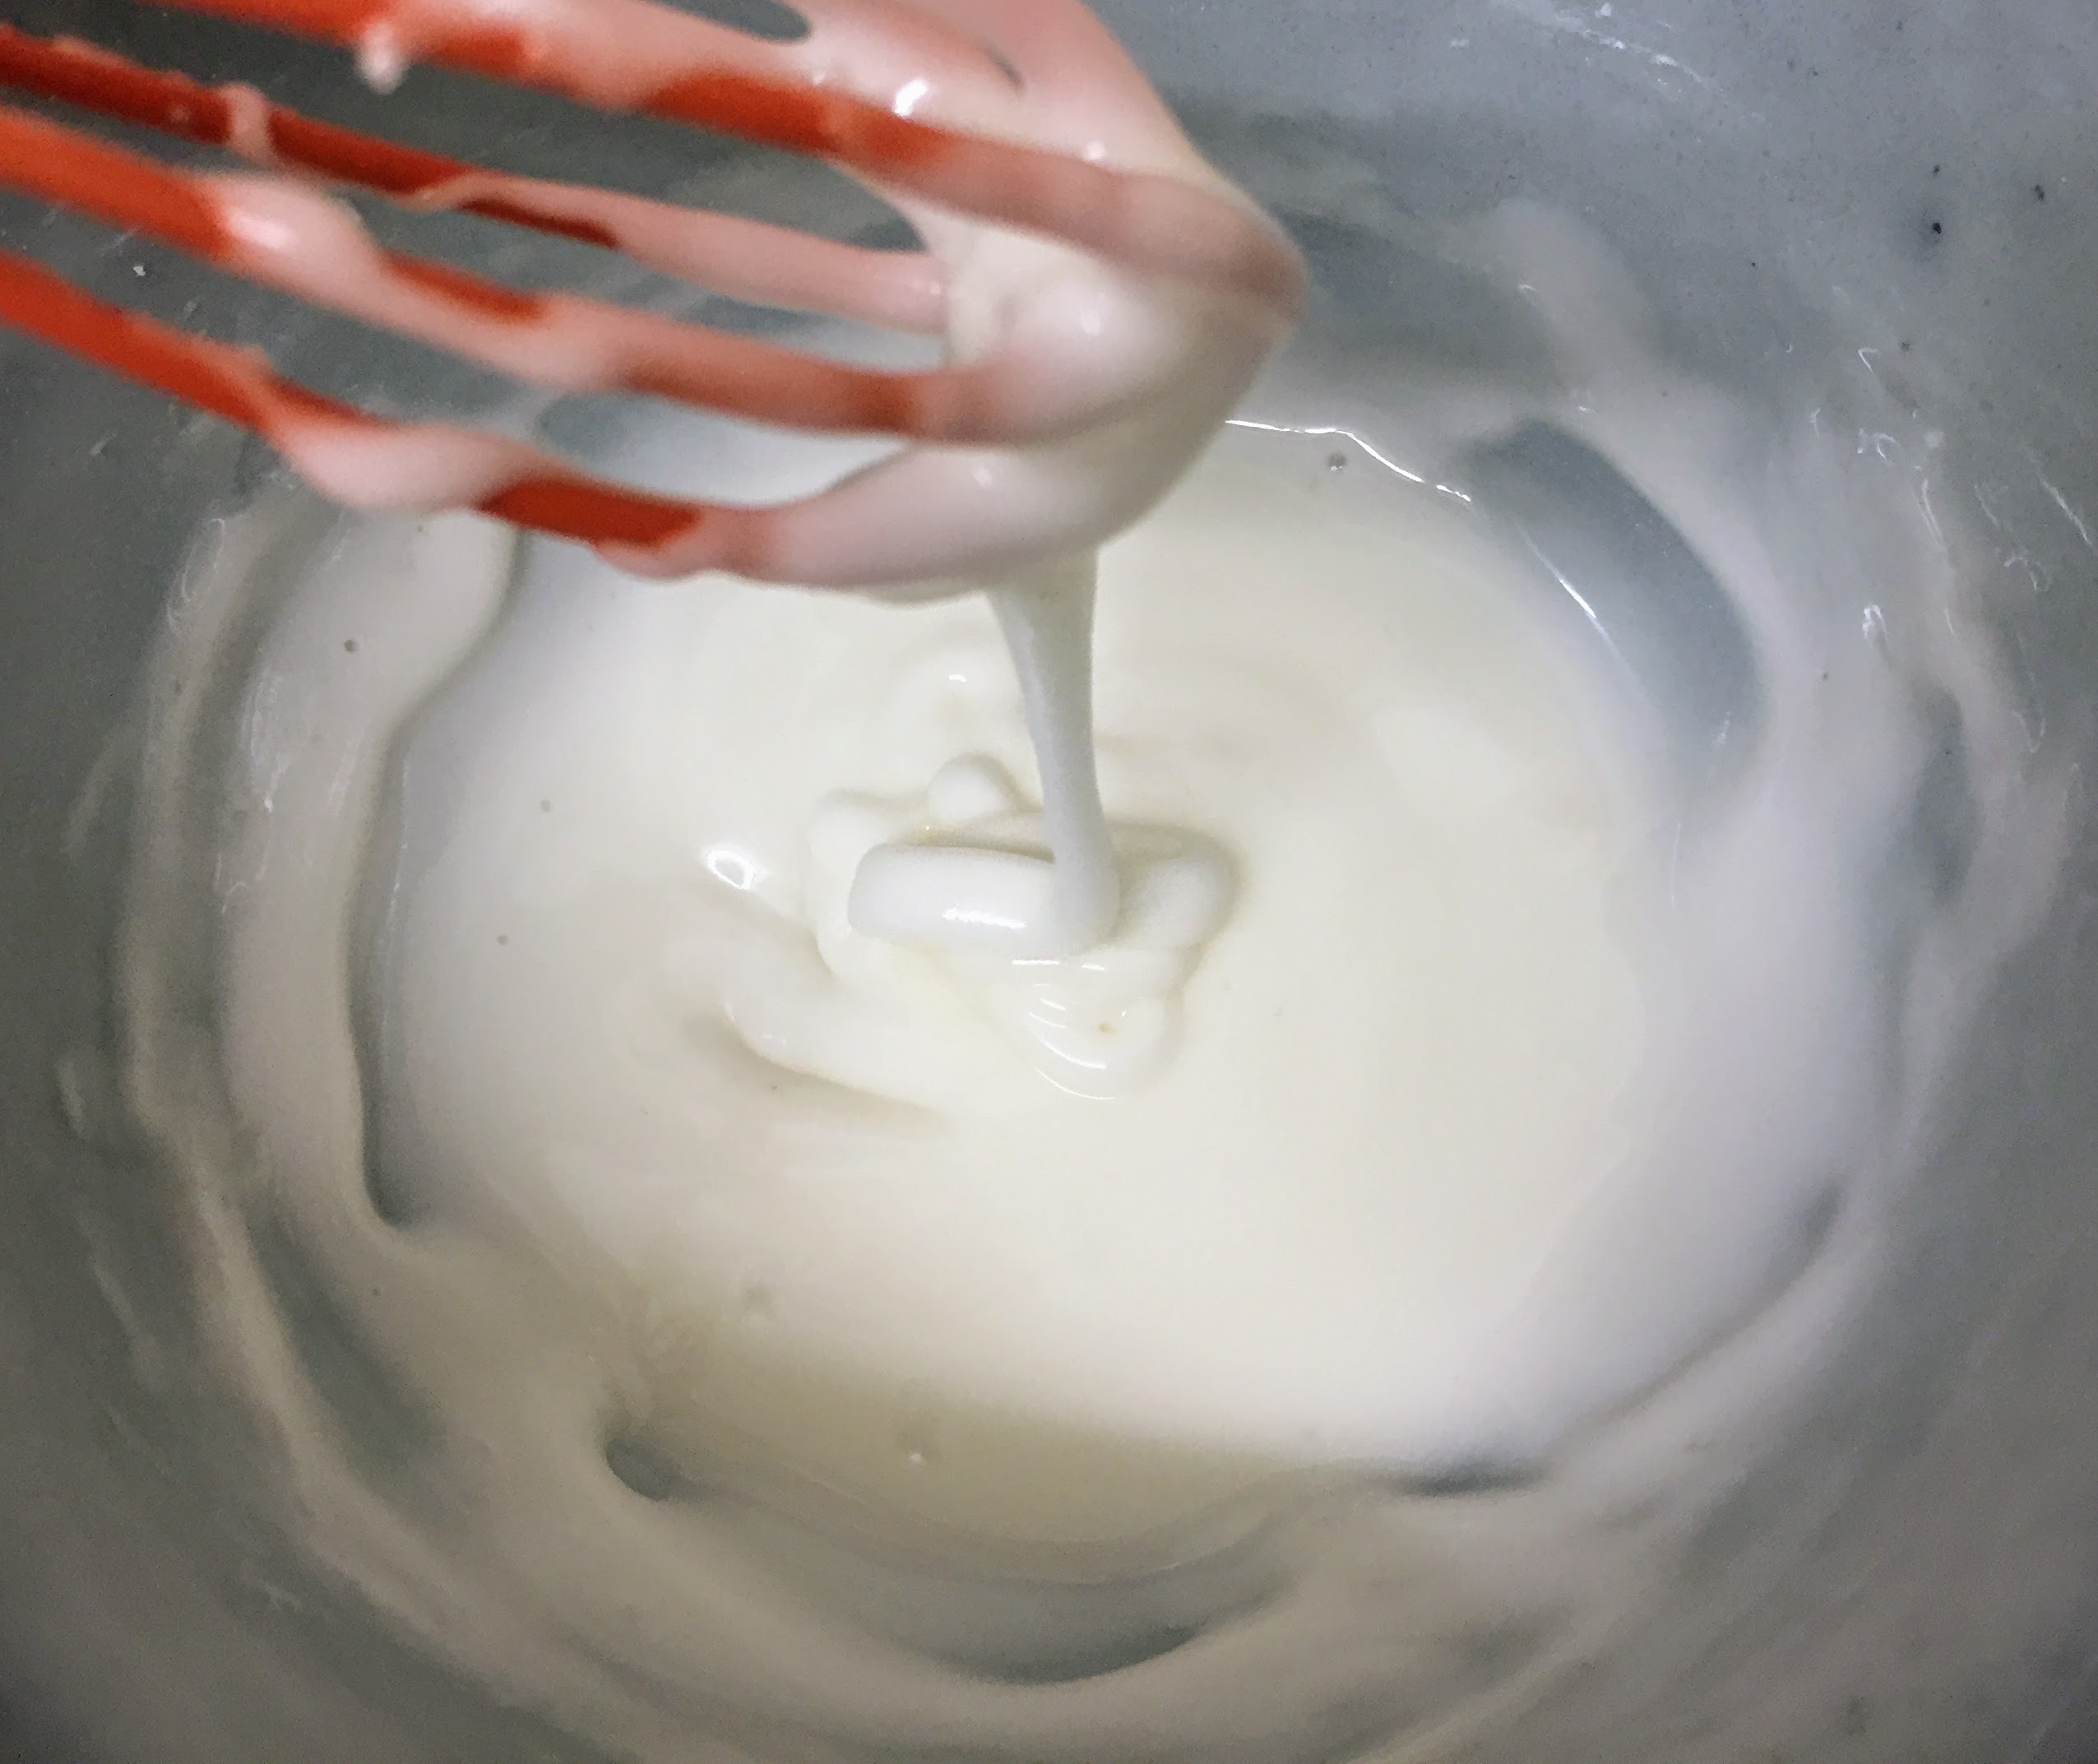 A close up of a bowl of thick white icing. A whisk is held above the bowl so the icing drizzles into the bowl. You can see the trail of the drizzled icing holding it's shape for a few seconds before merging into the rest of the icing, which is the perfect consistency for piping.